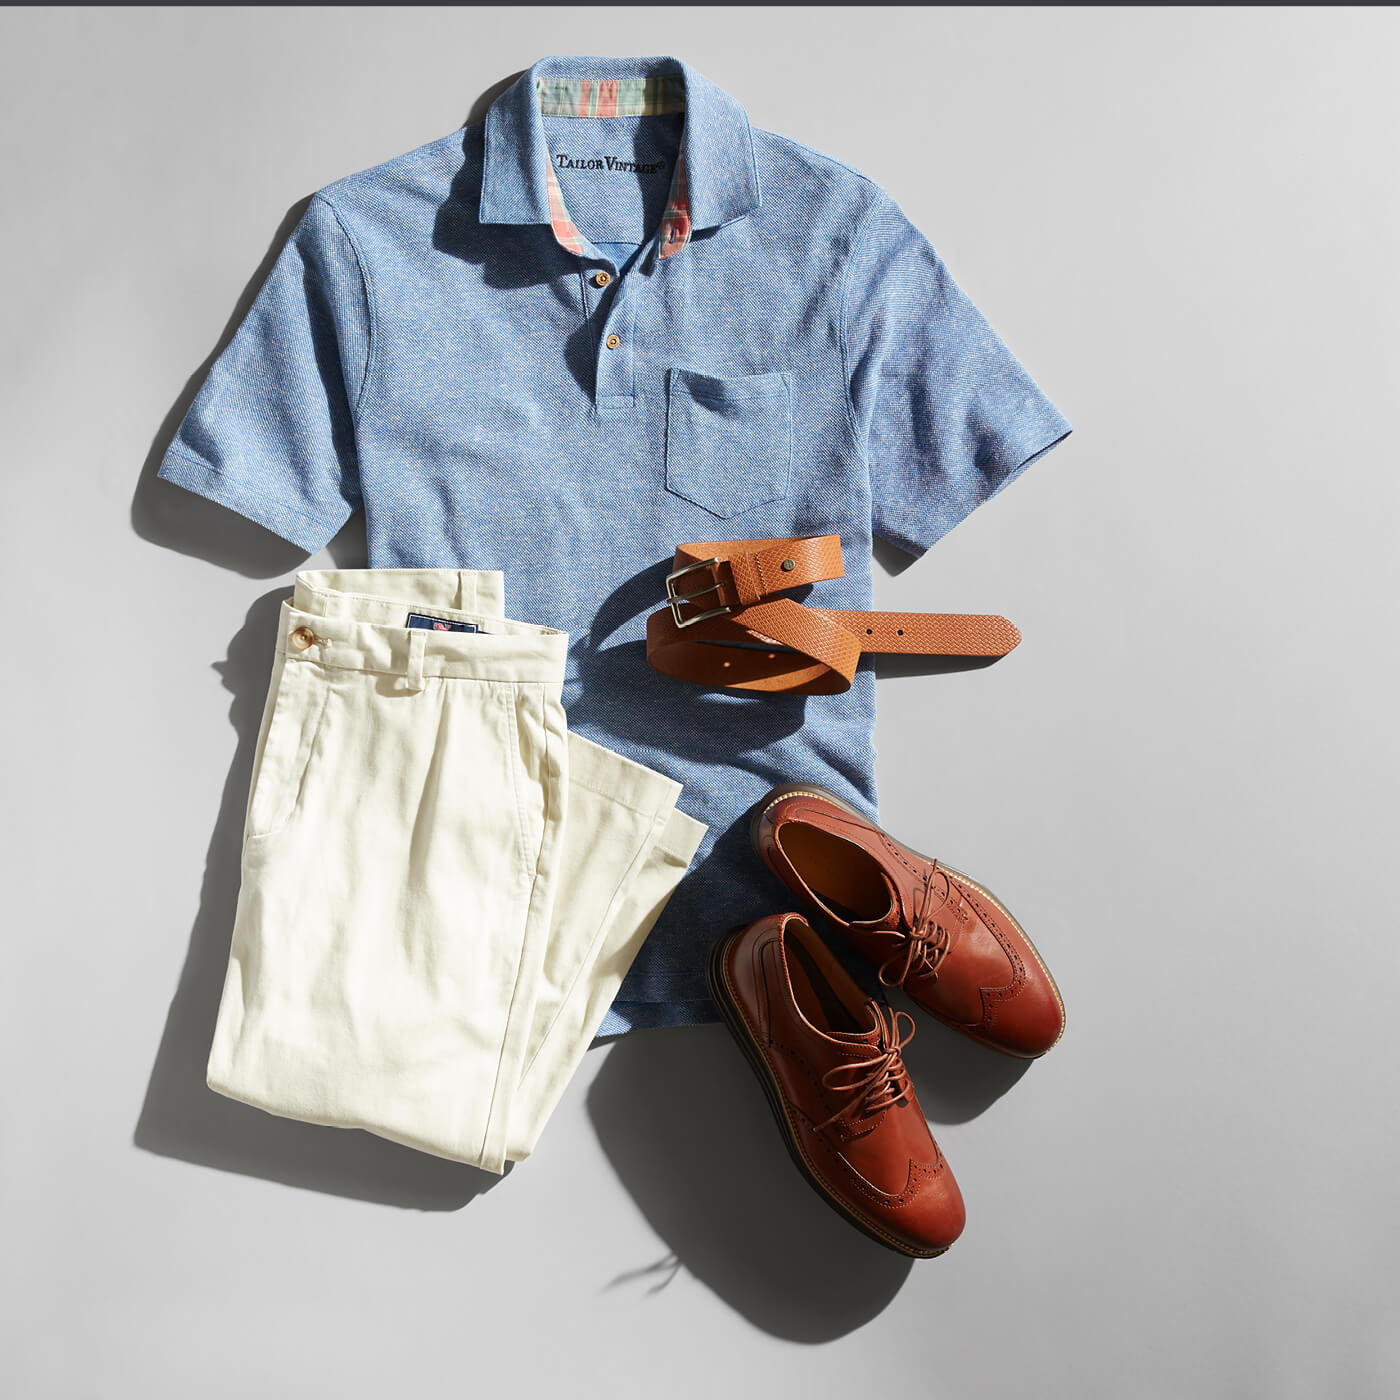 How to Dress for Work in the Summer | Stitch Fix Men